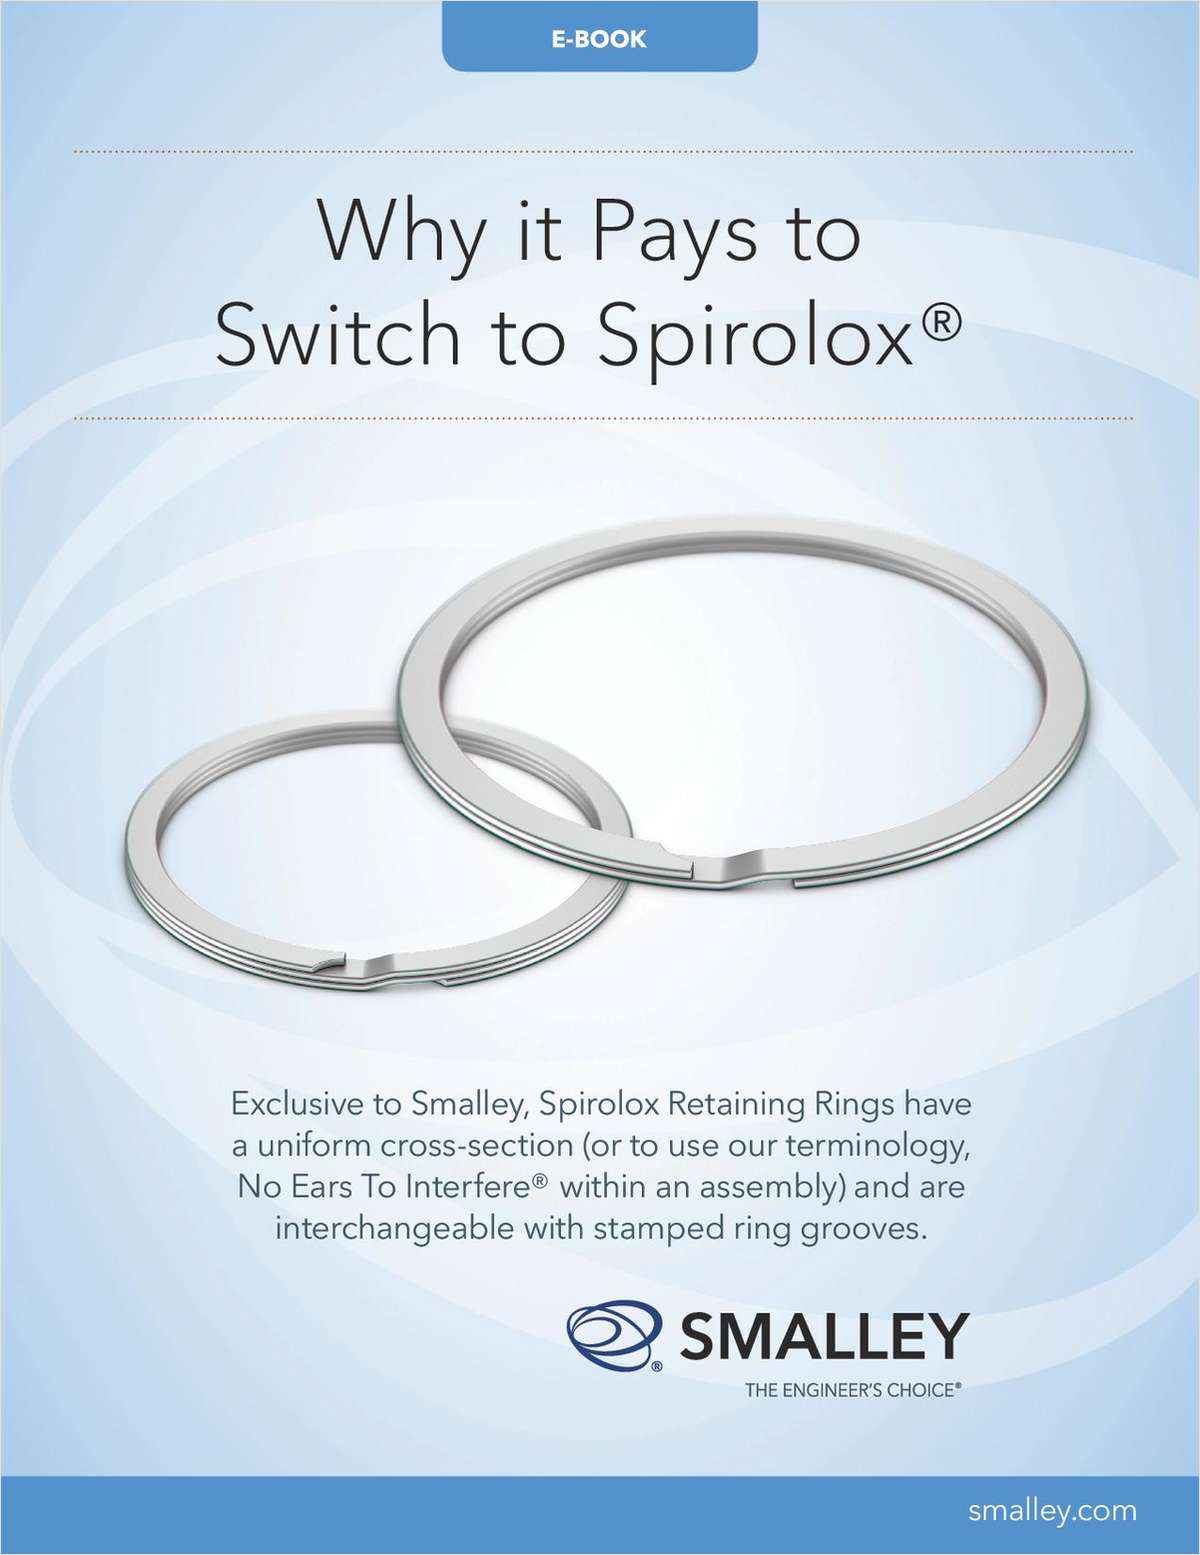 Why it pays to Switch to Spirolox Retaining Rings